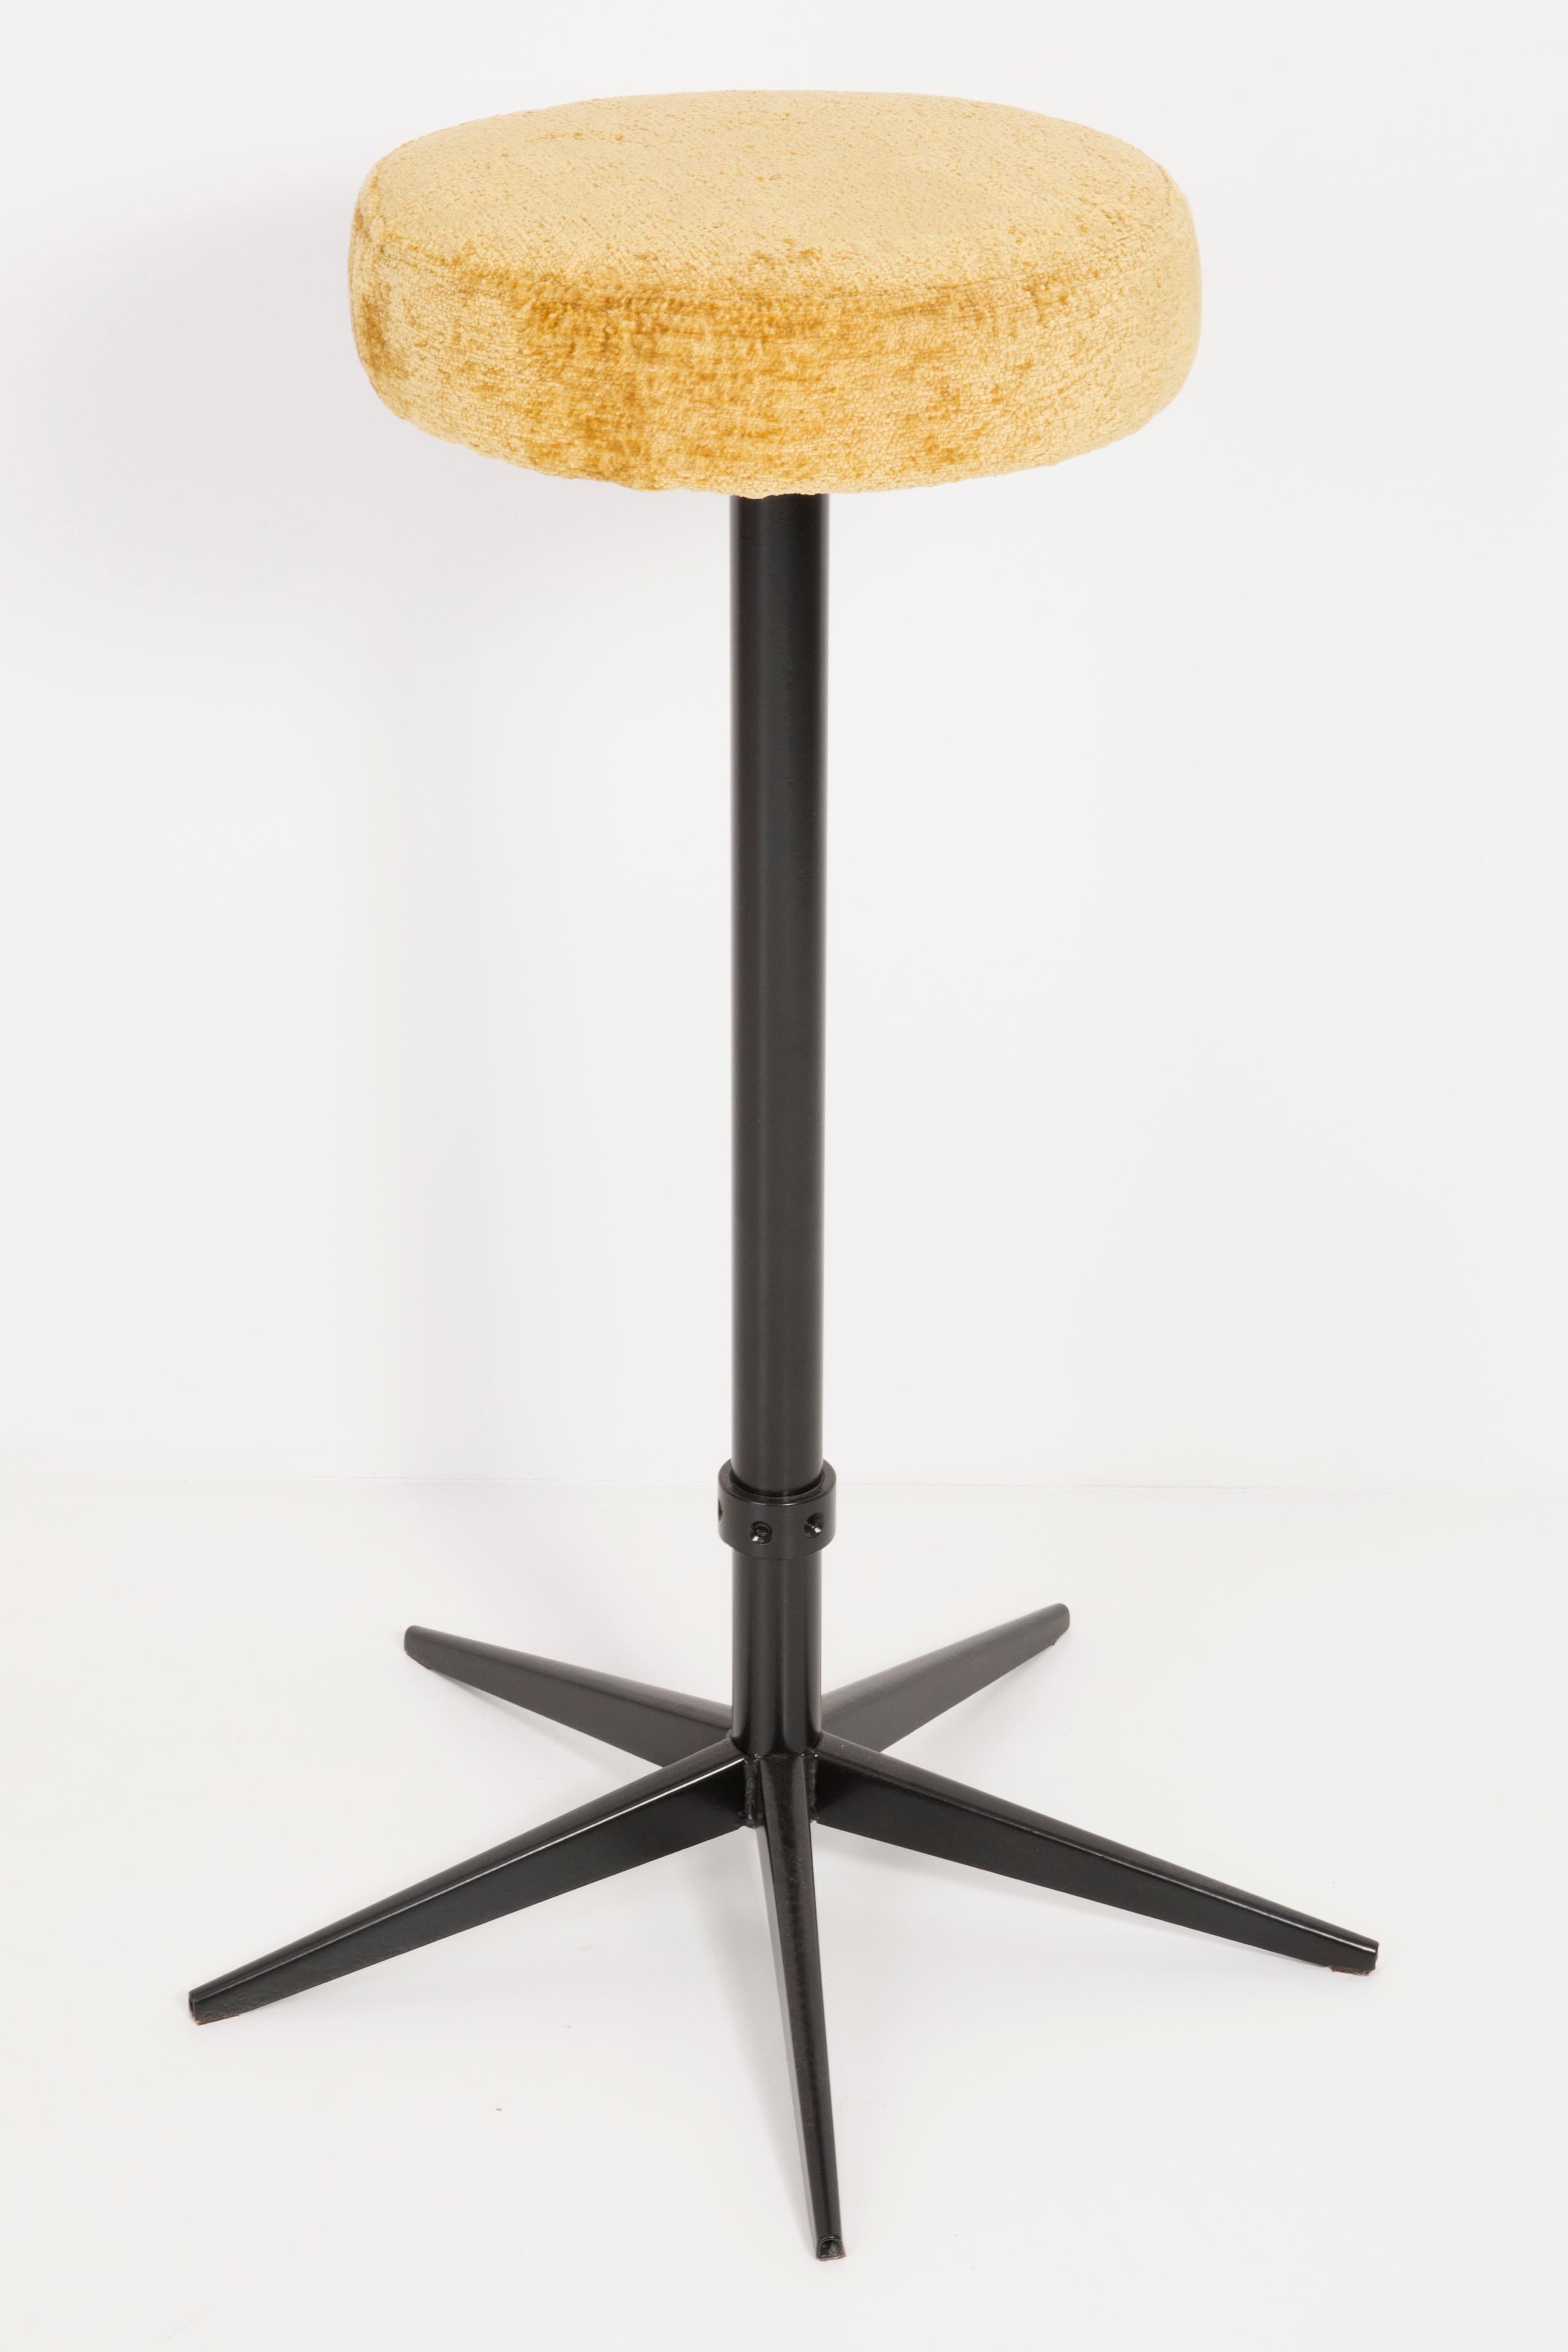 Hand-Crafted Vintage Modern Yellow Bar Stool, Germany, 1960s For Sale